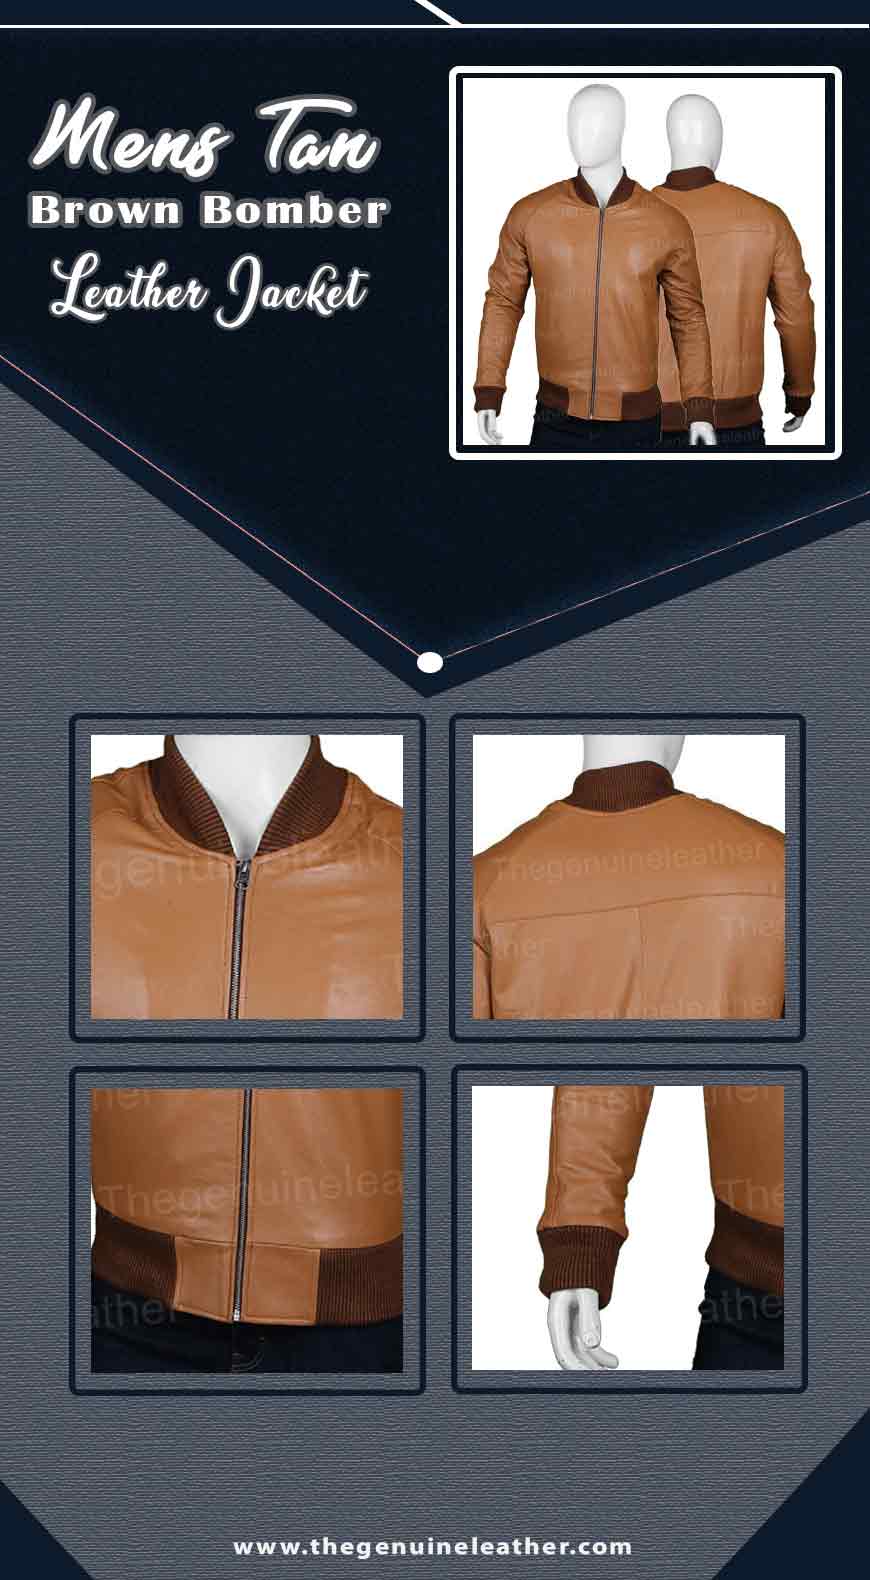 Mens Tan Brown Bomber Leather Jacket Infographic